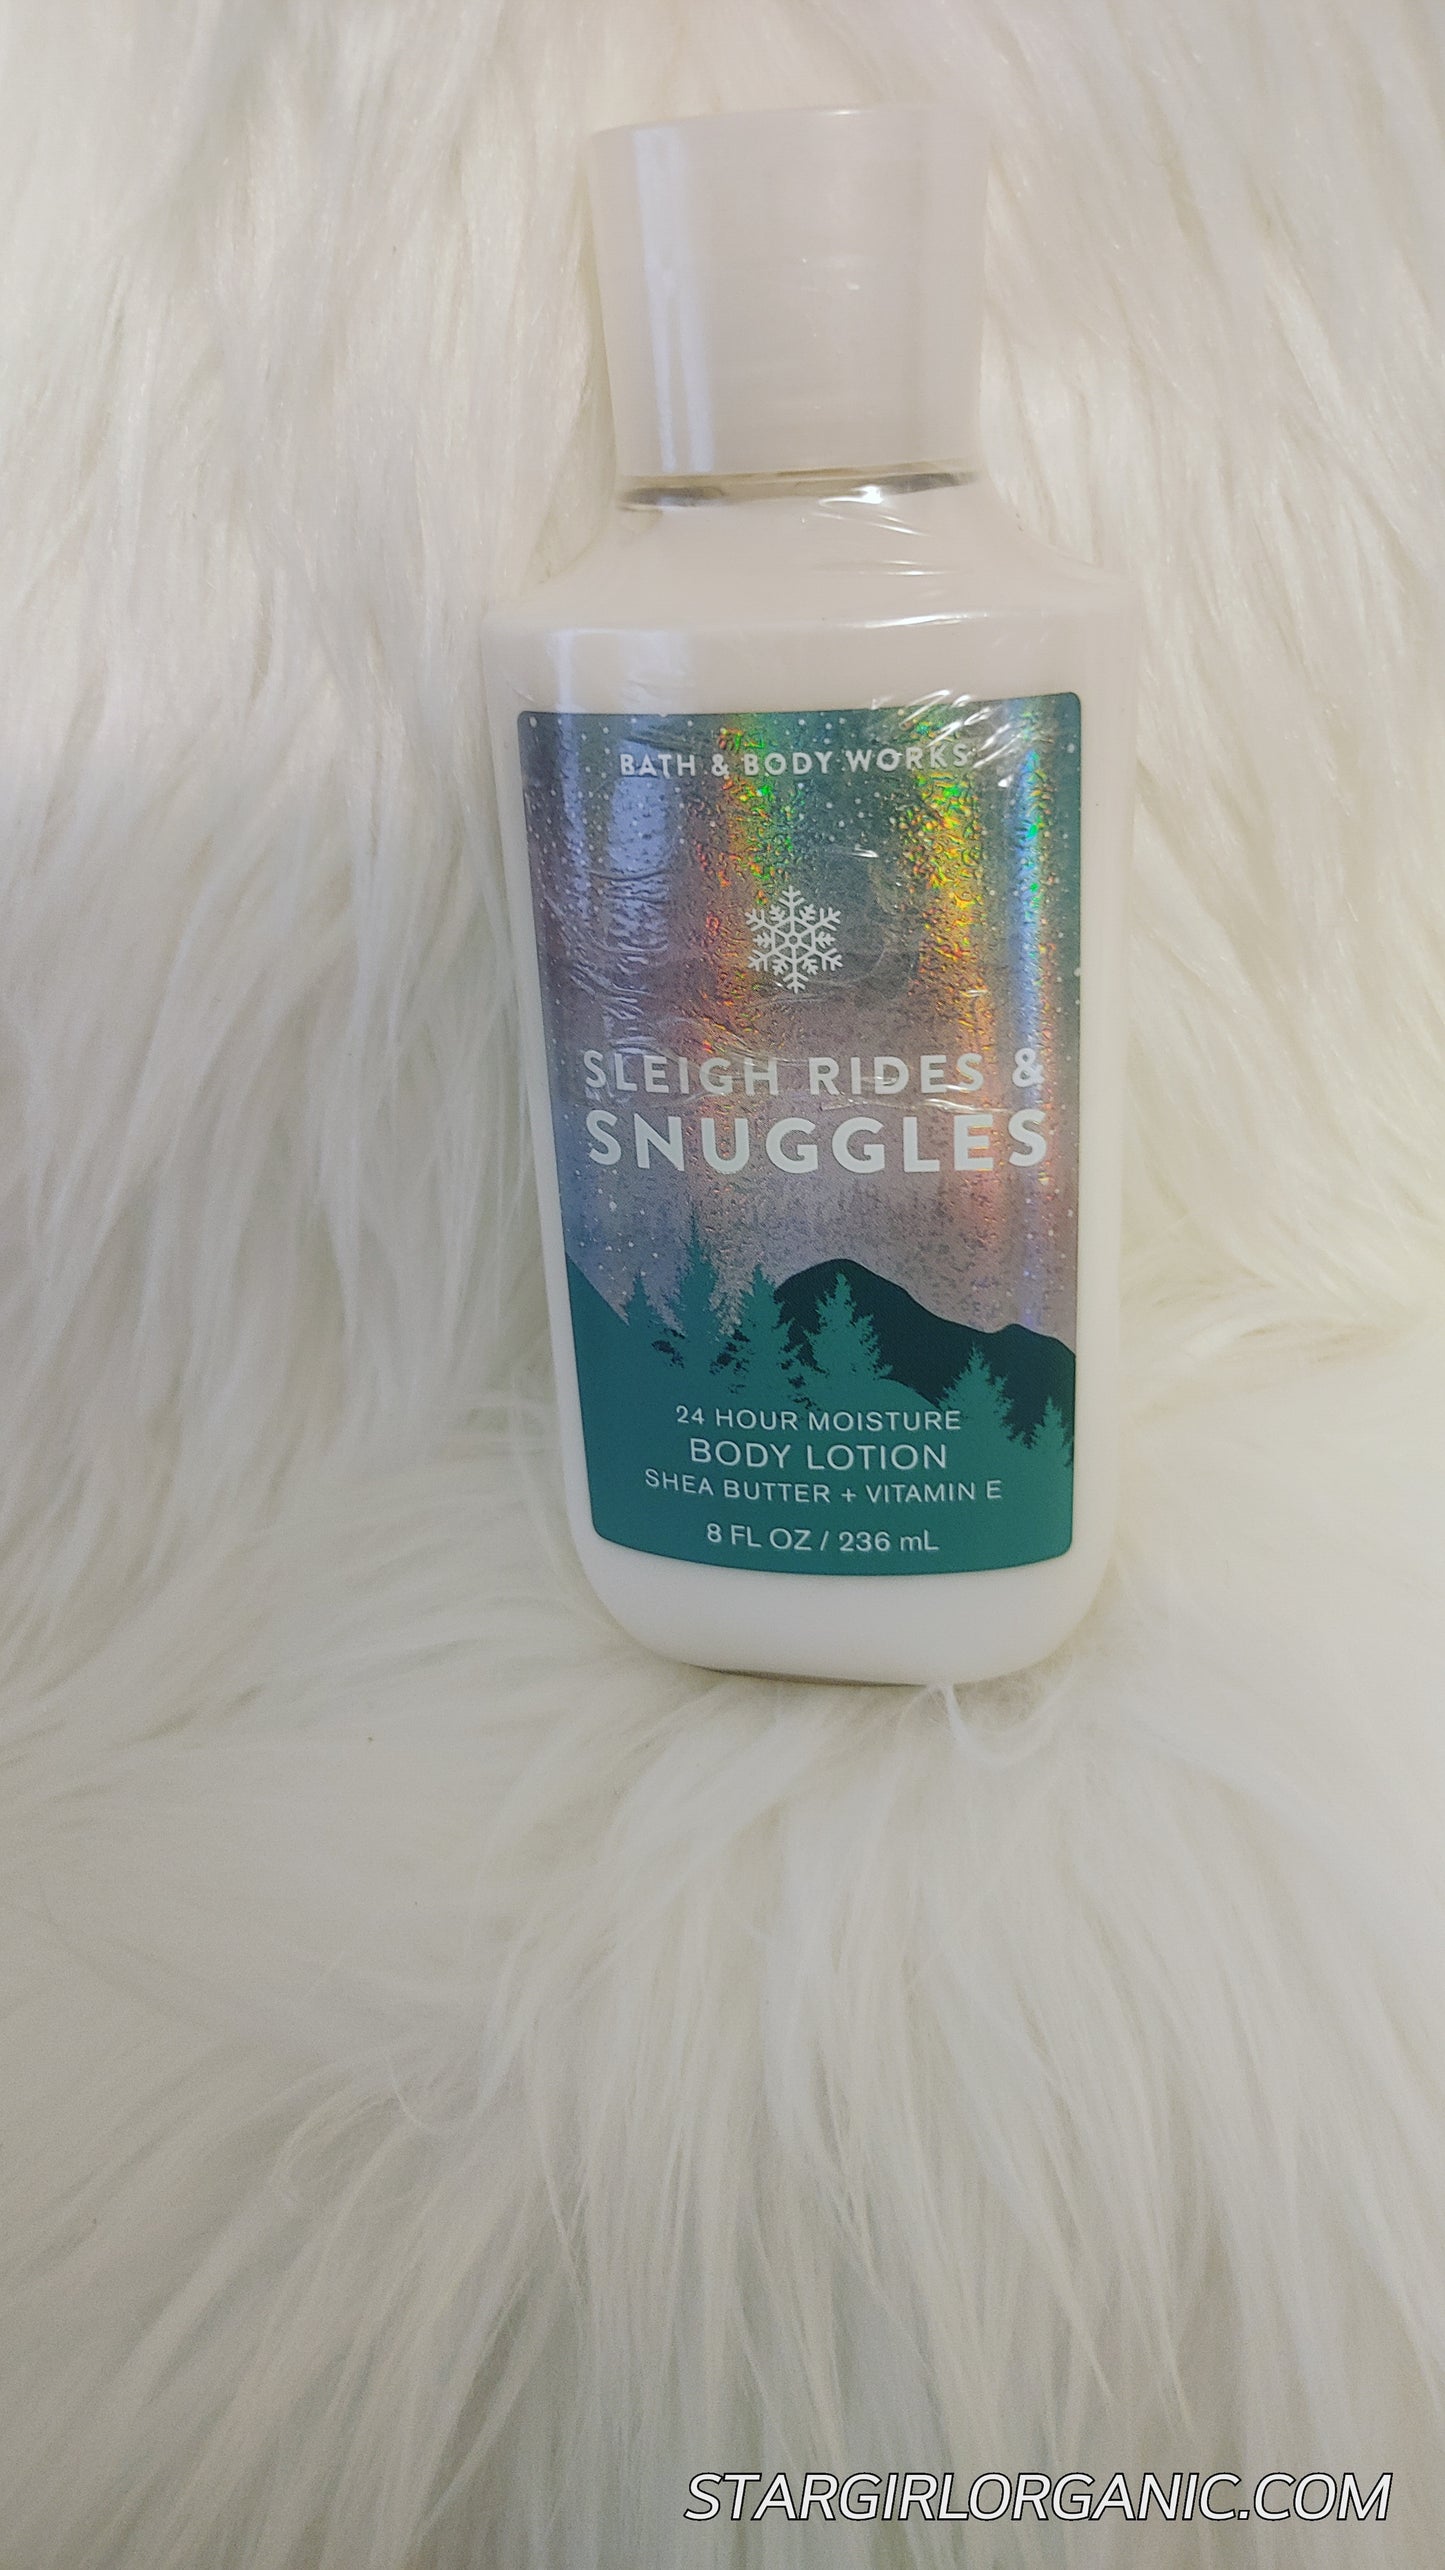 Bath and Body Works Sleigh Rides and Snuggles Body Lotion